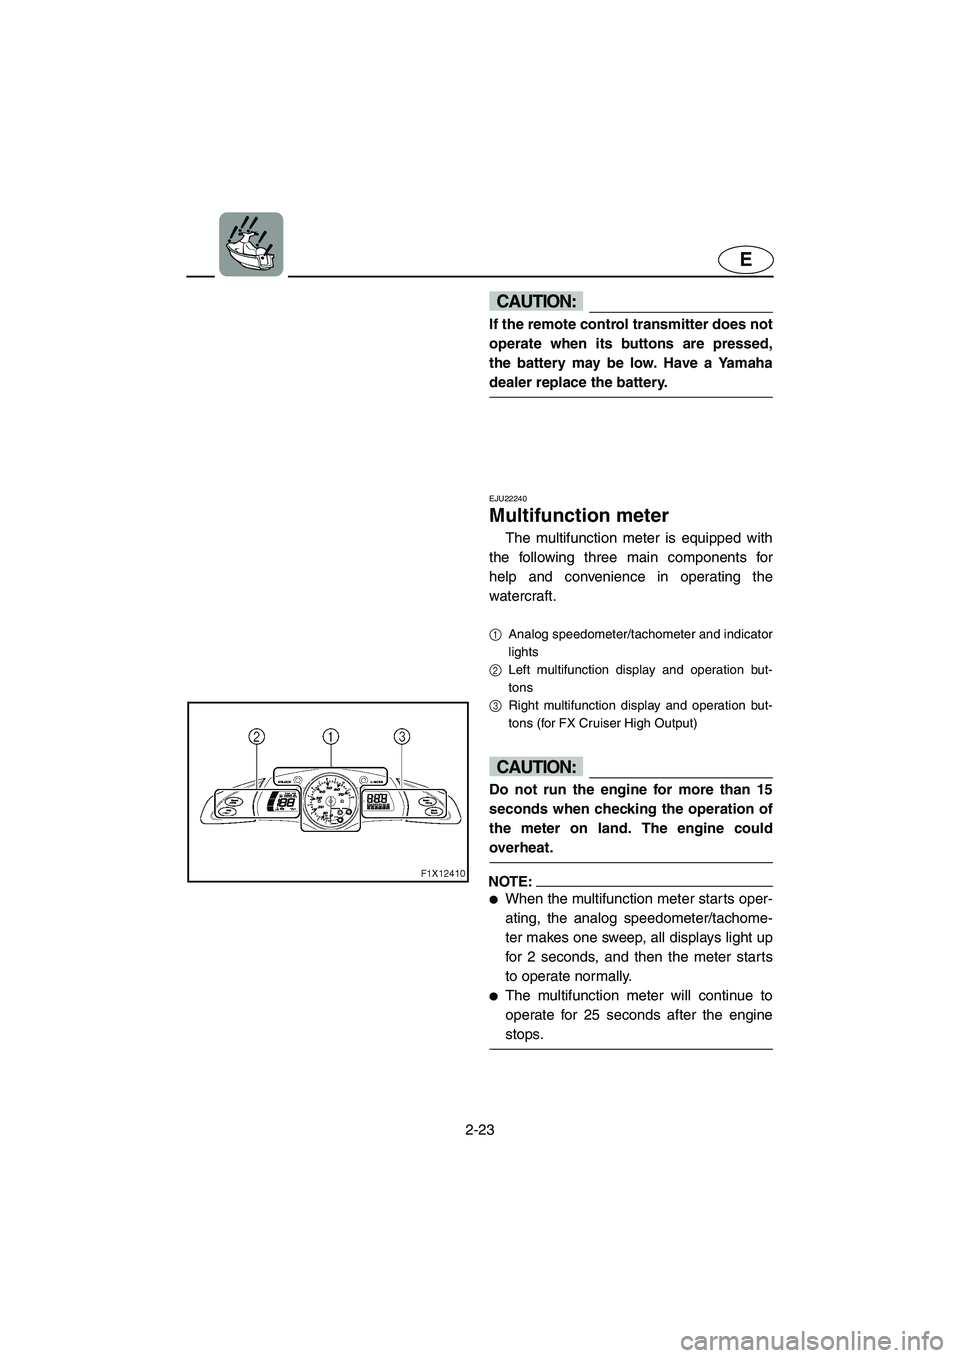 YAMAHA FX HO 2006  Owners Manual 2-23
E
CAUTION:@ If the remote control transmitter does not
operate when its buttons are pressed,
the battery may be low. Have a Yamaha
dealer replace the battery. 
@ 
EJU22240 
Multifunction meter 
T